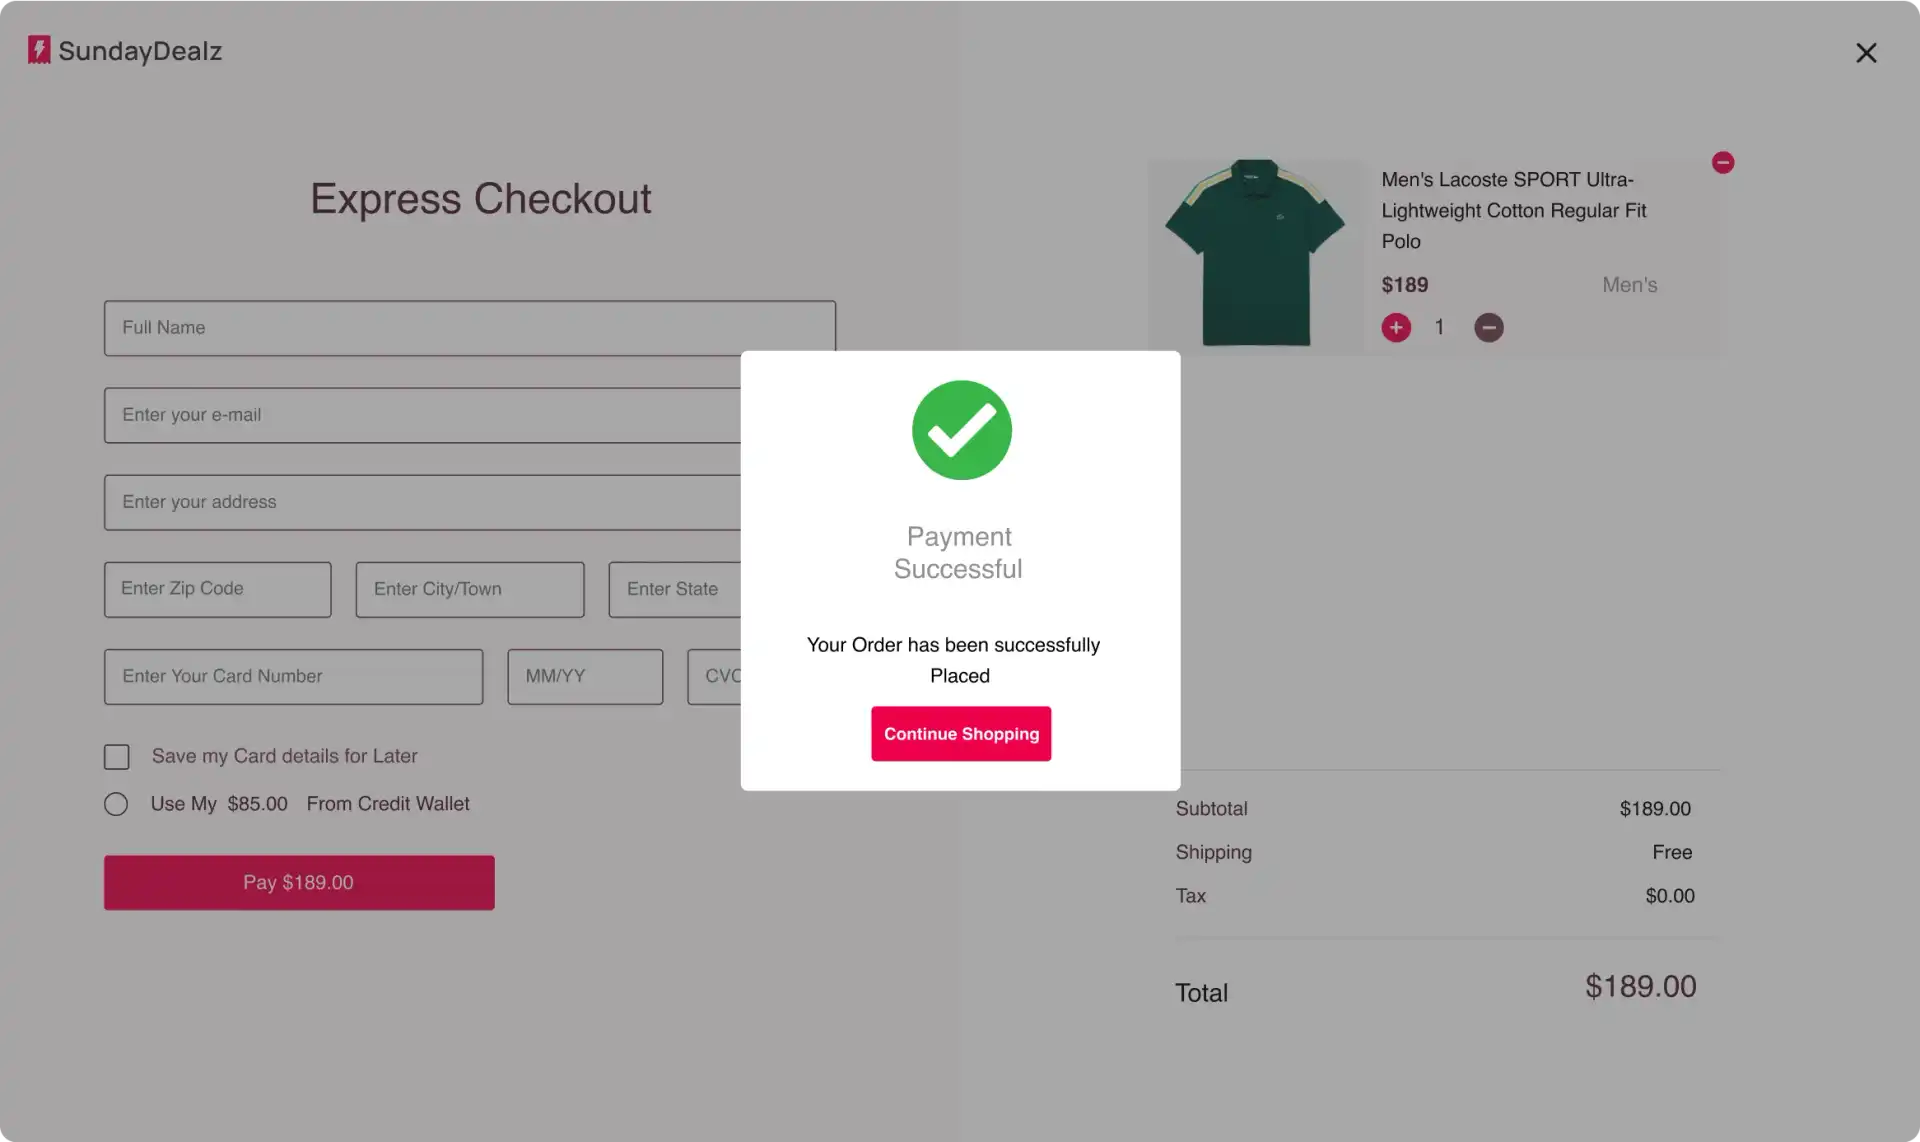 UI screen to show payment status